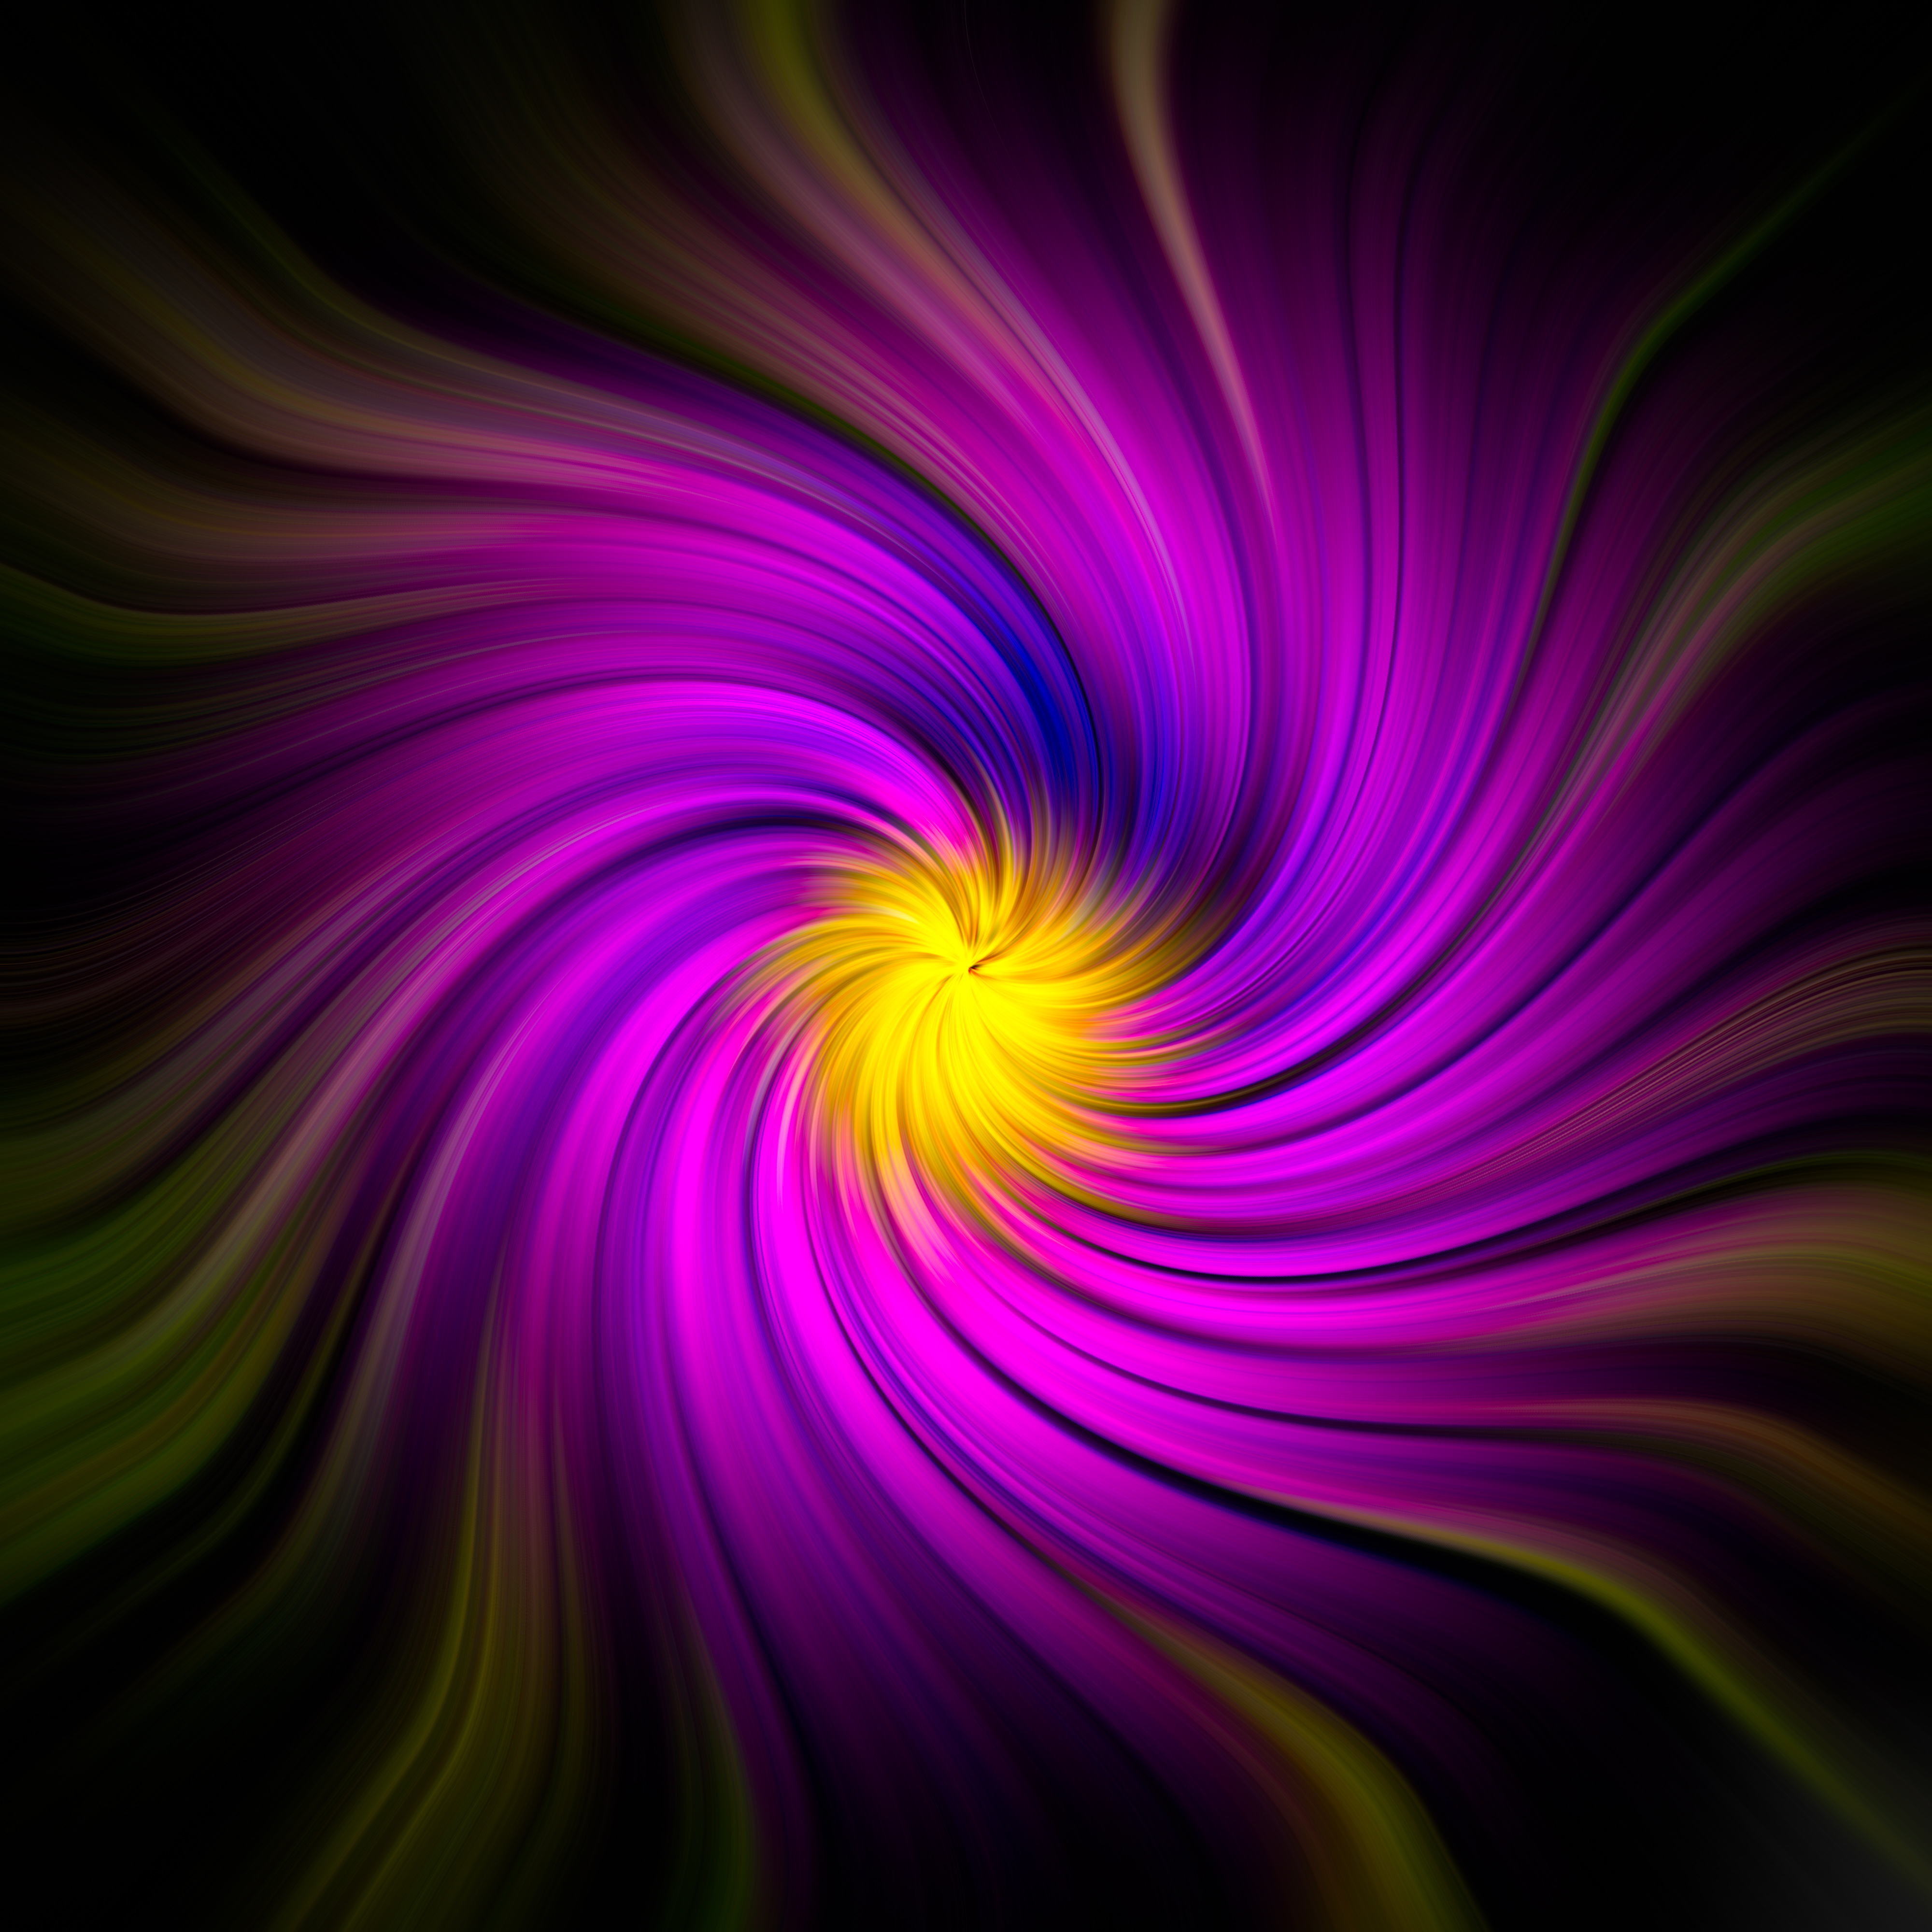 vertical wallpaper rotation, abstract, violet, fractal, purple, swirling, involute